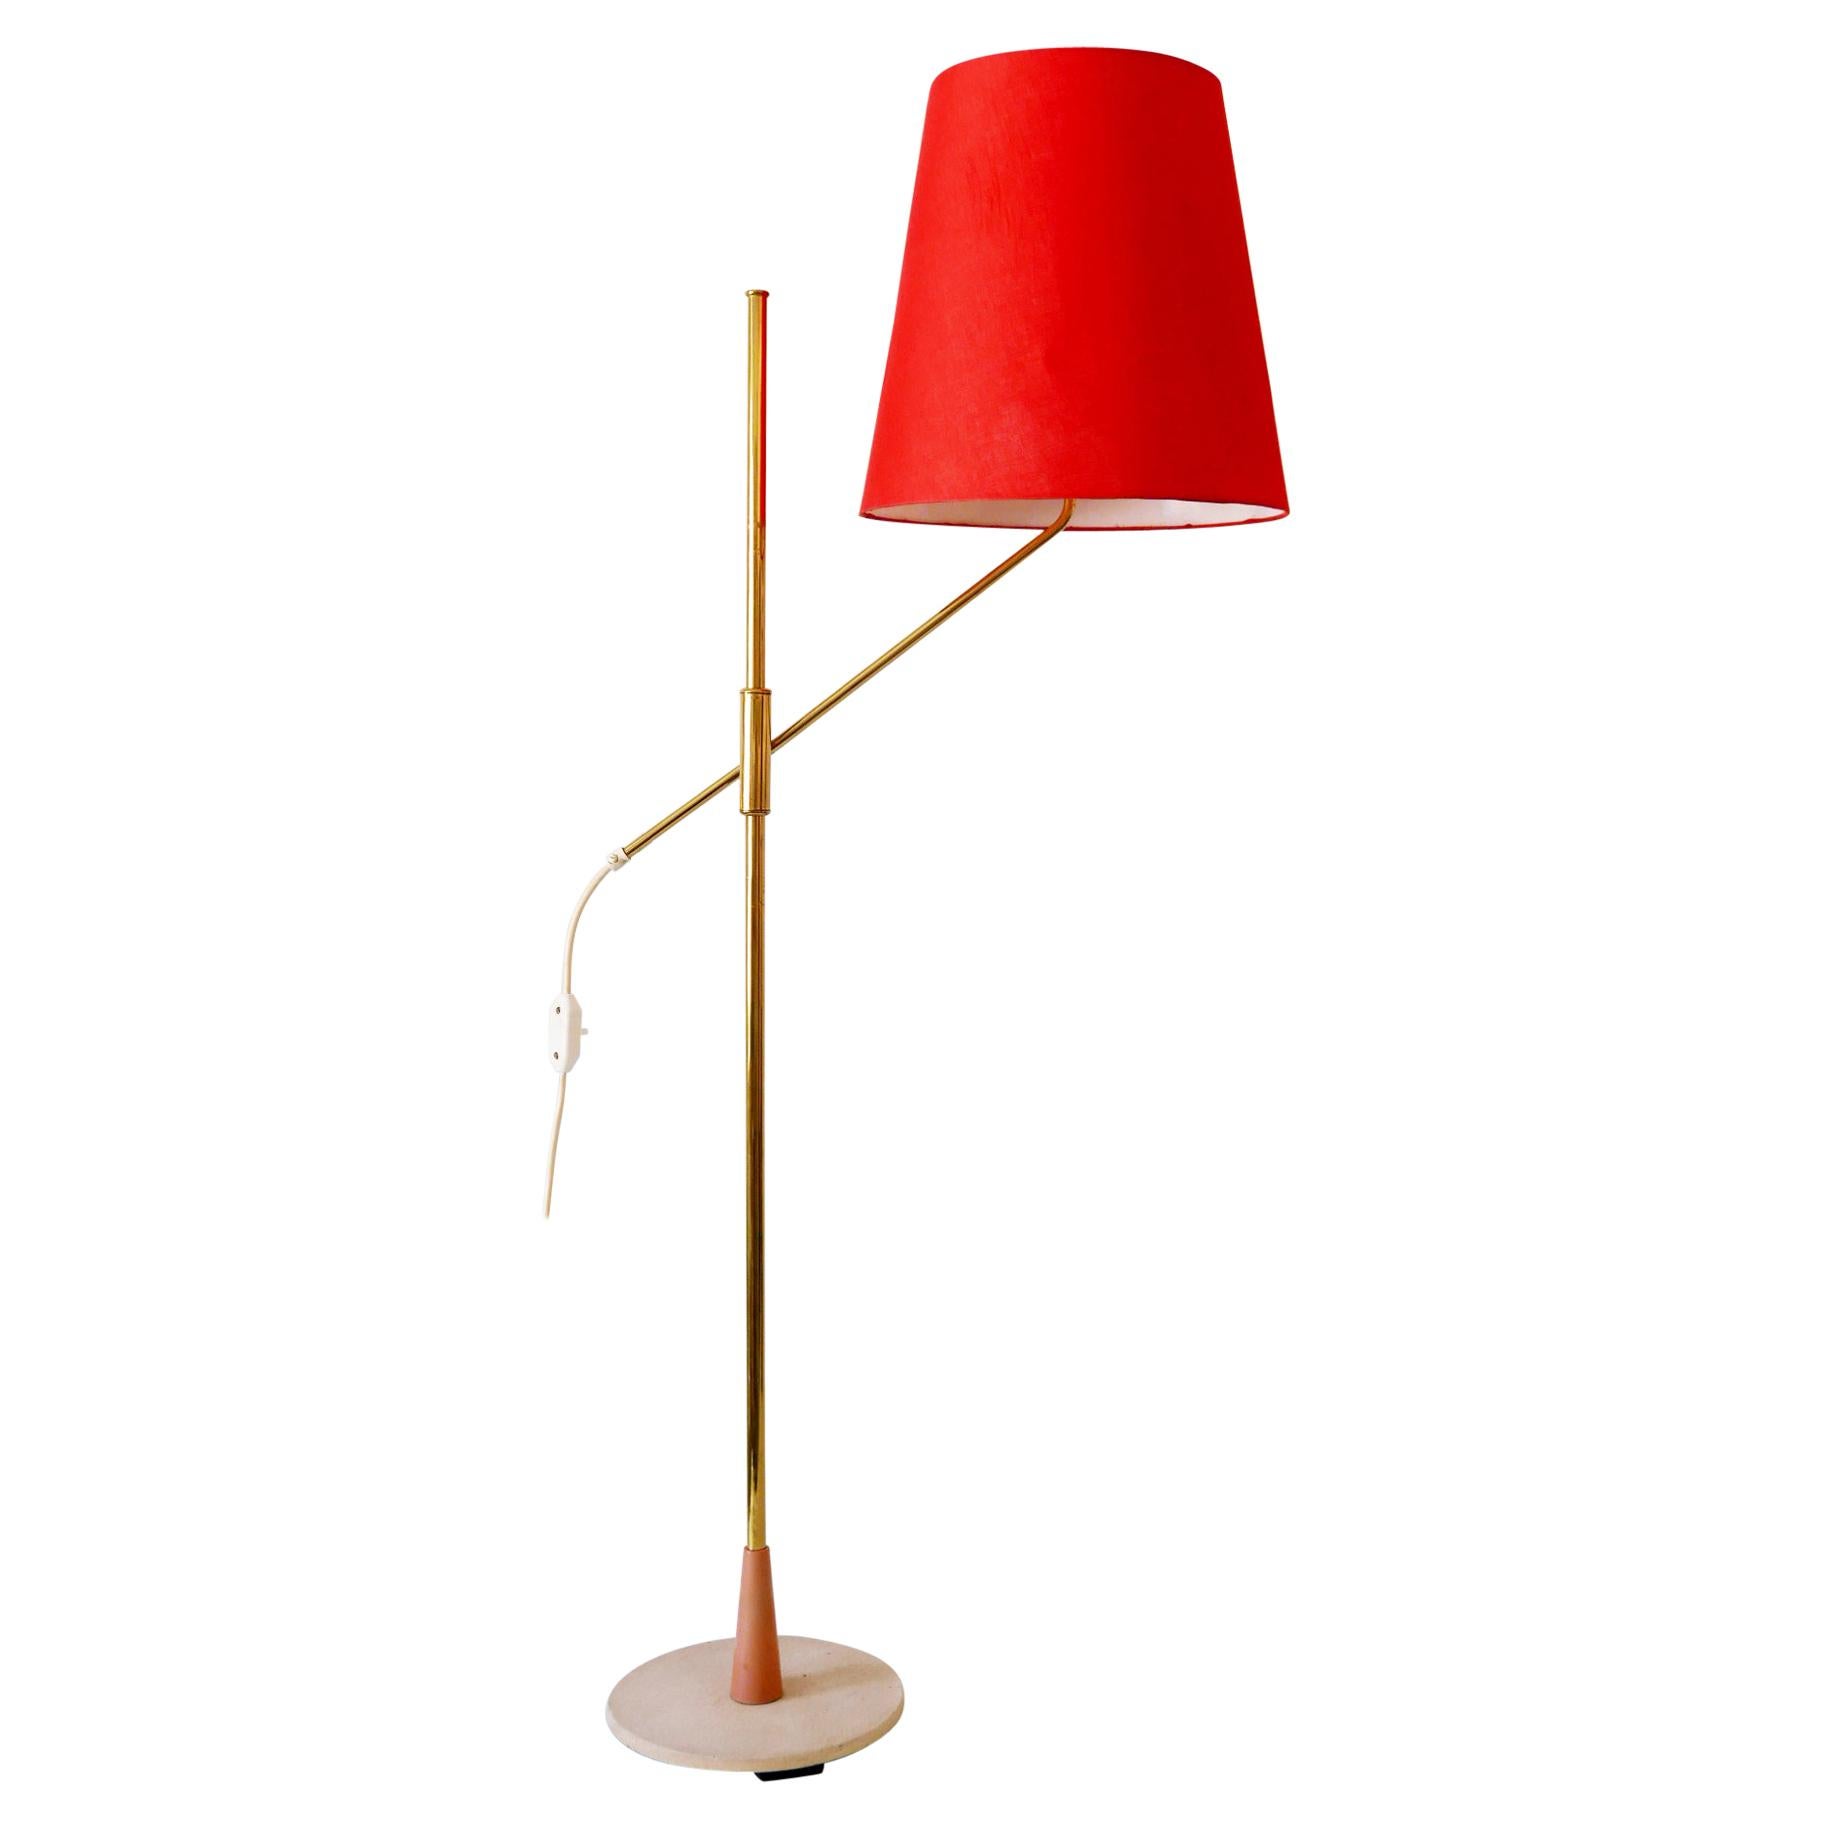 Exceptional 'Fishing Pole' Floor Lamp by Svend Aage Holm Sørensen Denmark  1950s For Sale at 1stDibs